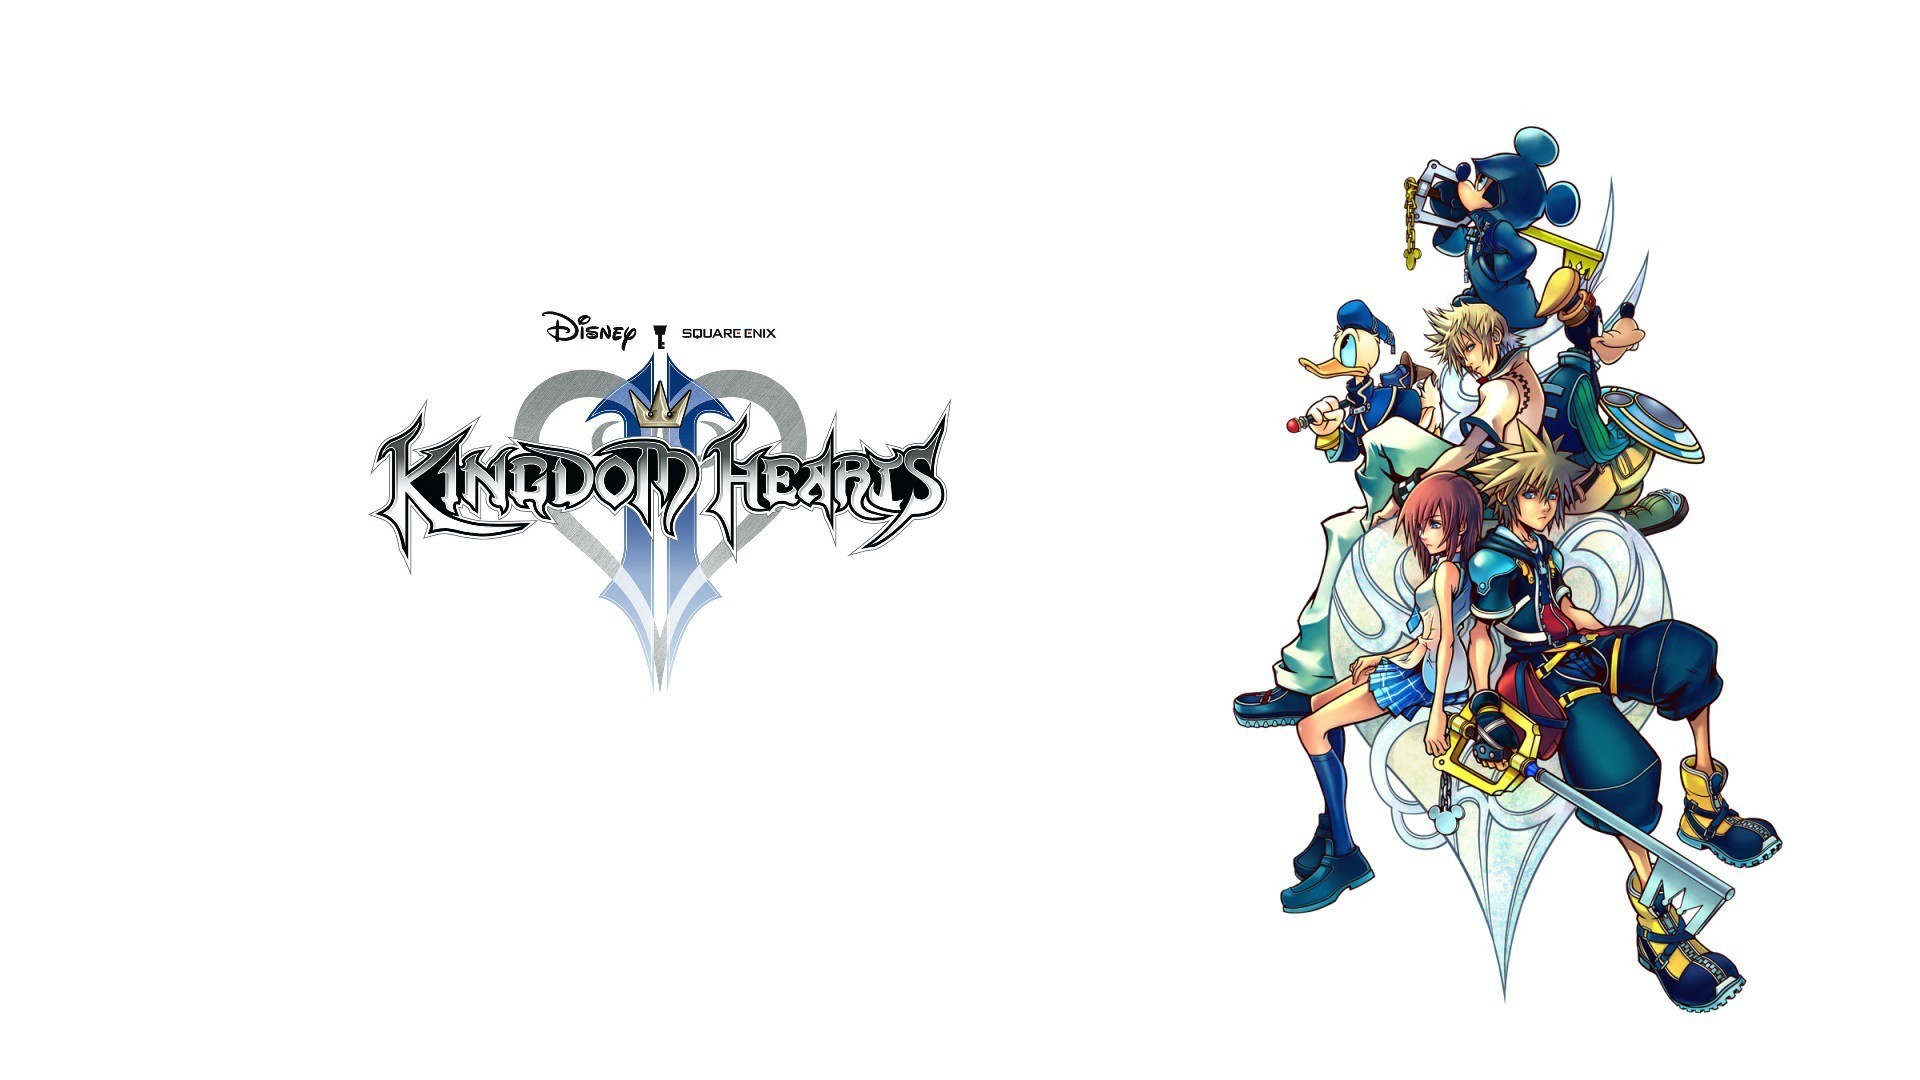 1920x1080  A "Simple and Clean" Kingdom Hearts 2 Wallpaper .